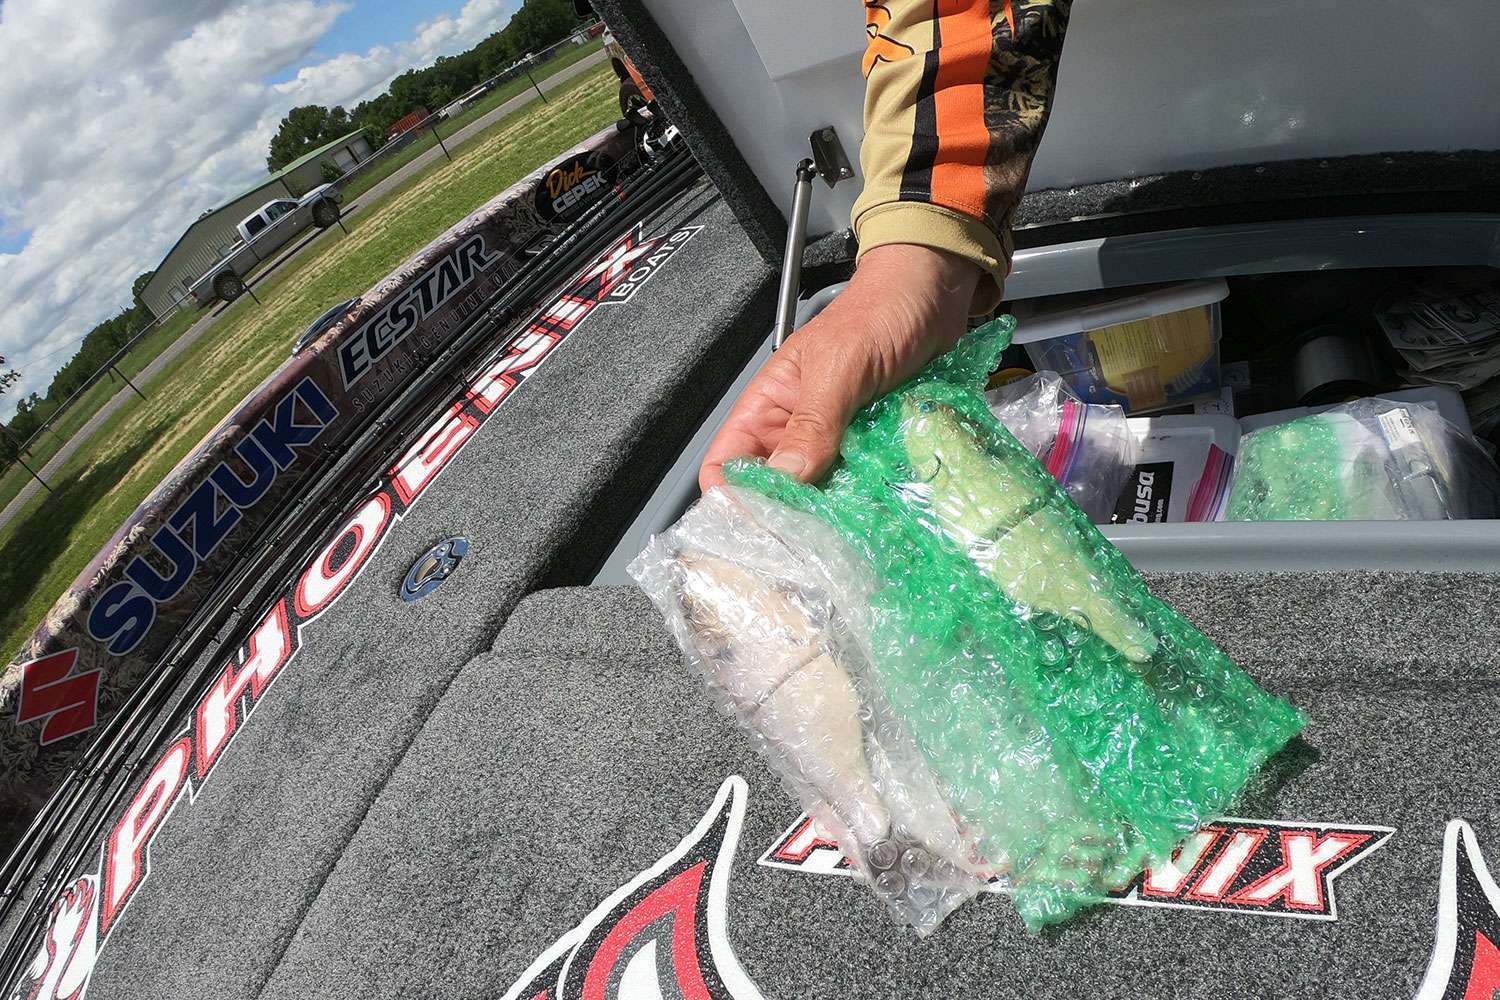 Here's a closer, yet limited look at these baits. He said they were custom swimbaits, expensive custom swimbaits. 